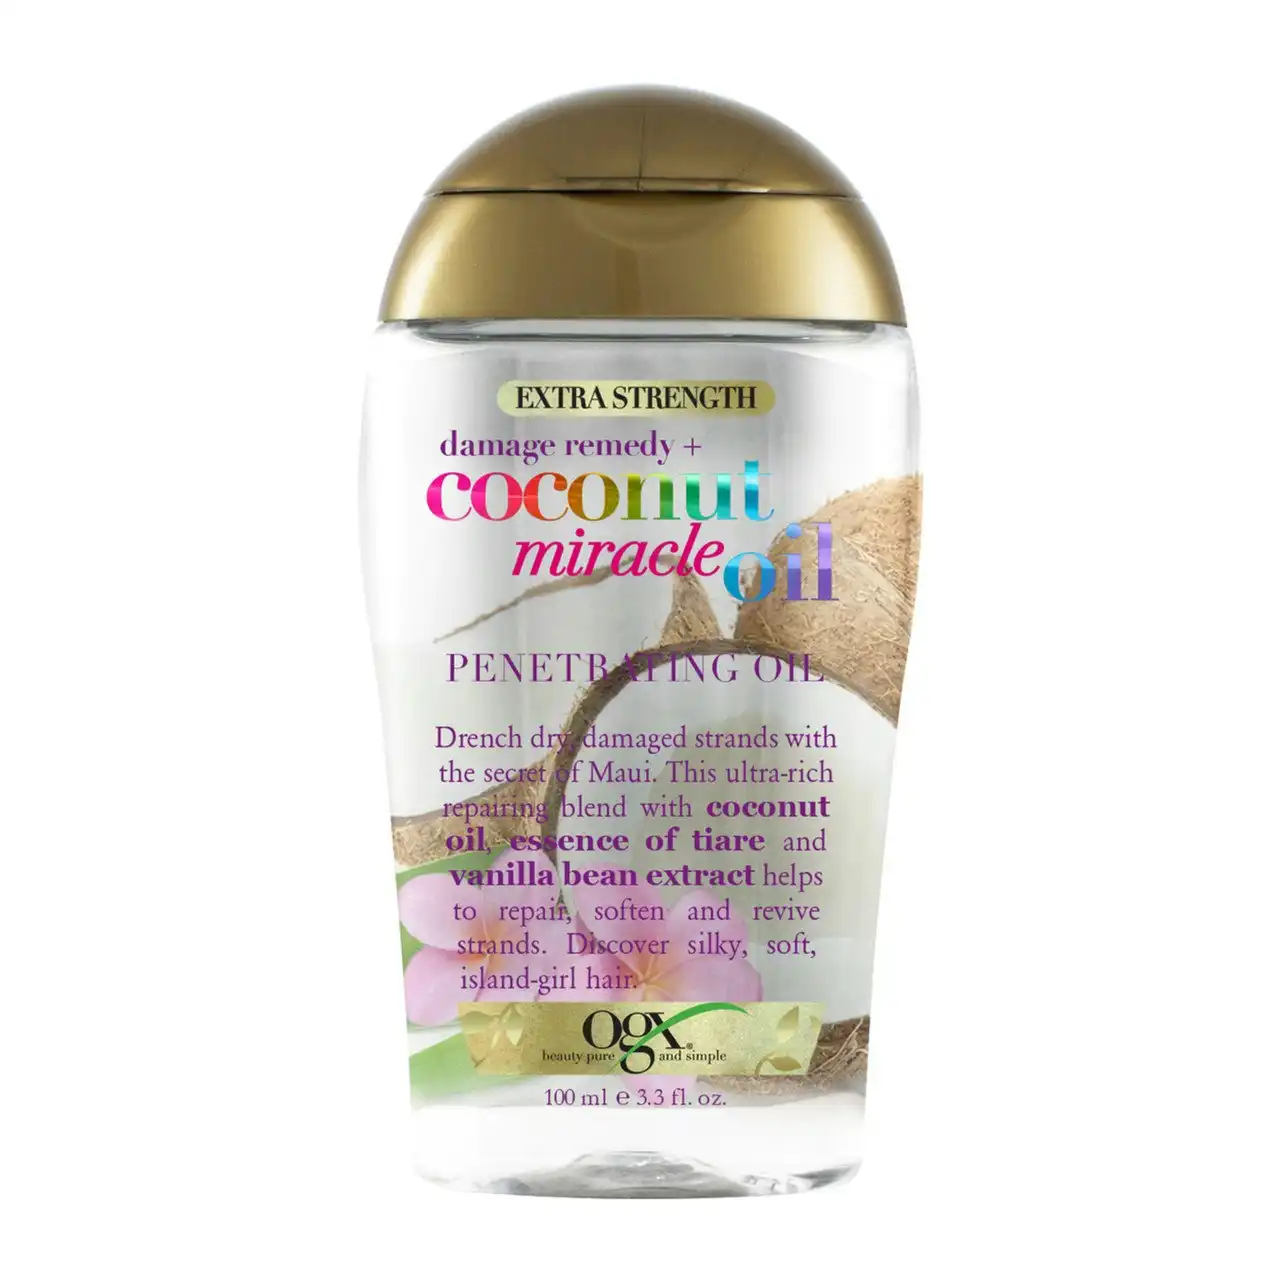 OGX Extra Strength Damage Remedy + Hydrating & Repairing Coconut Miracle Oil Penetrating Oil For Dry & Damaged Hair 100mL